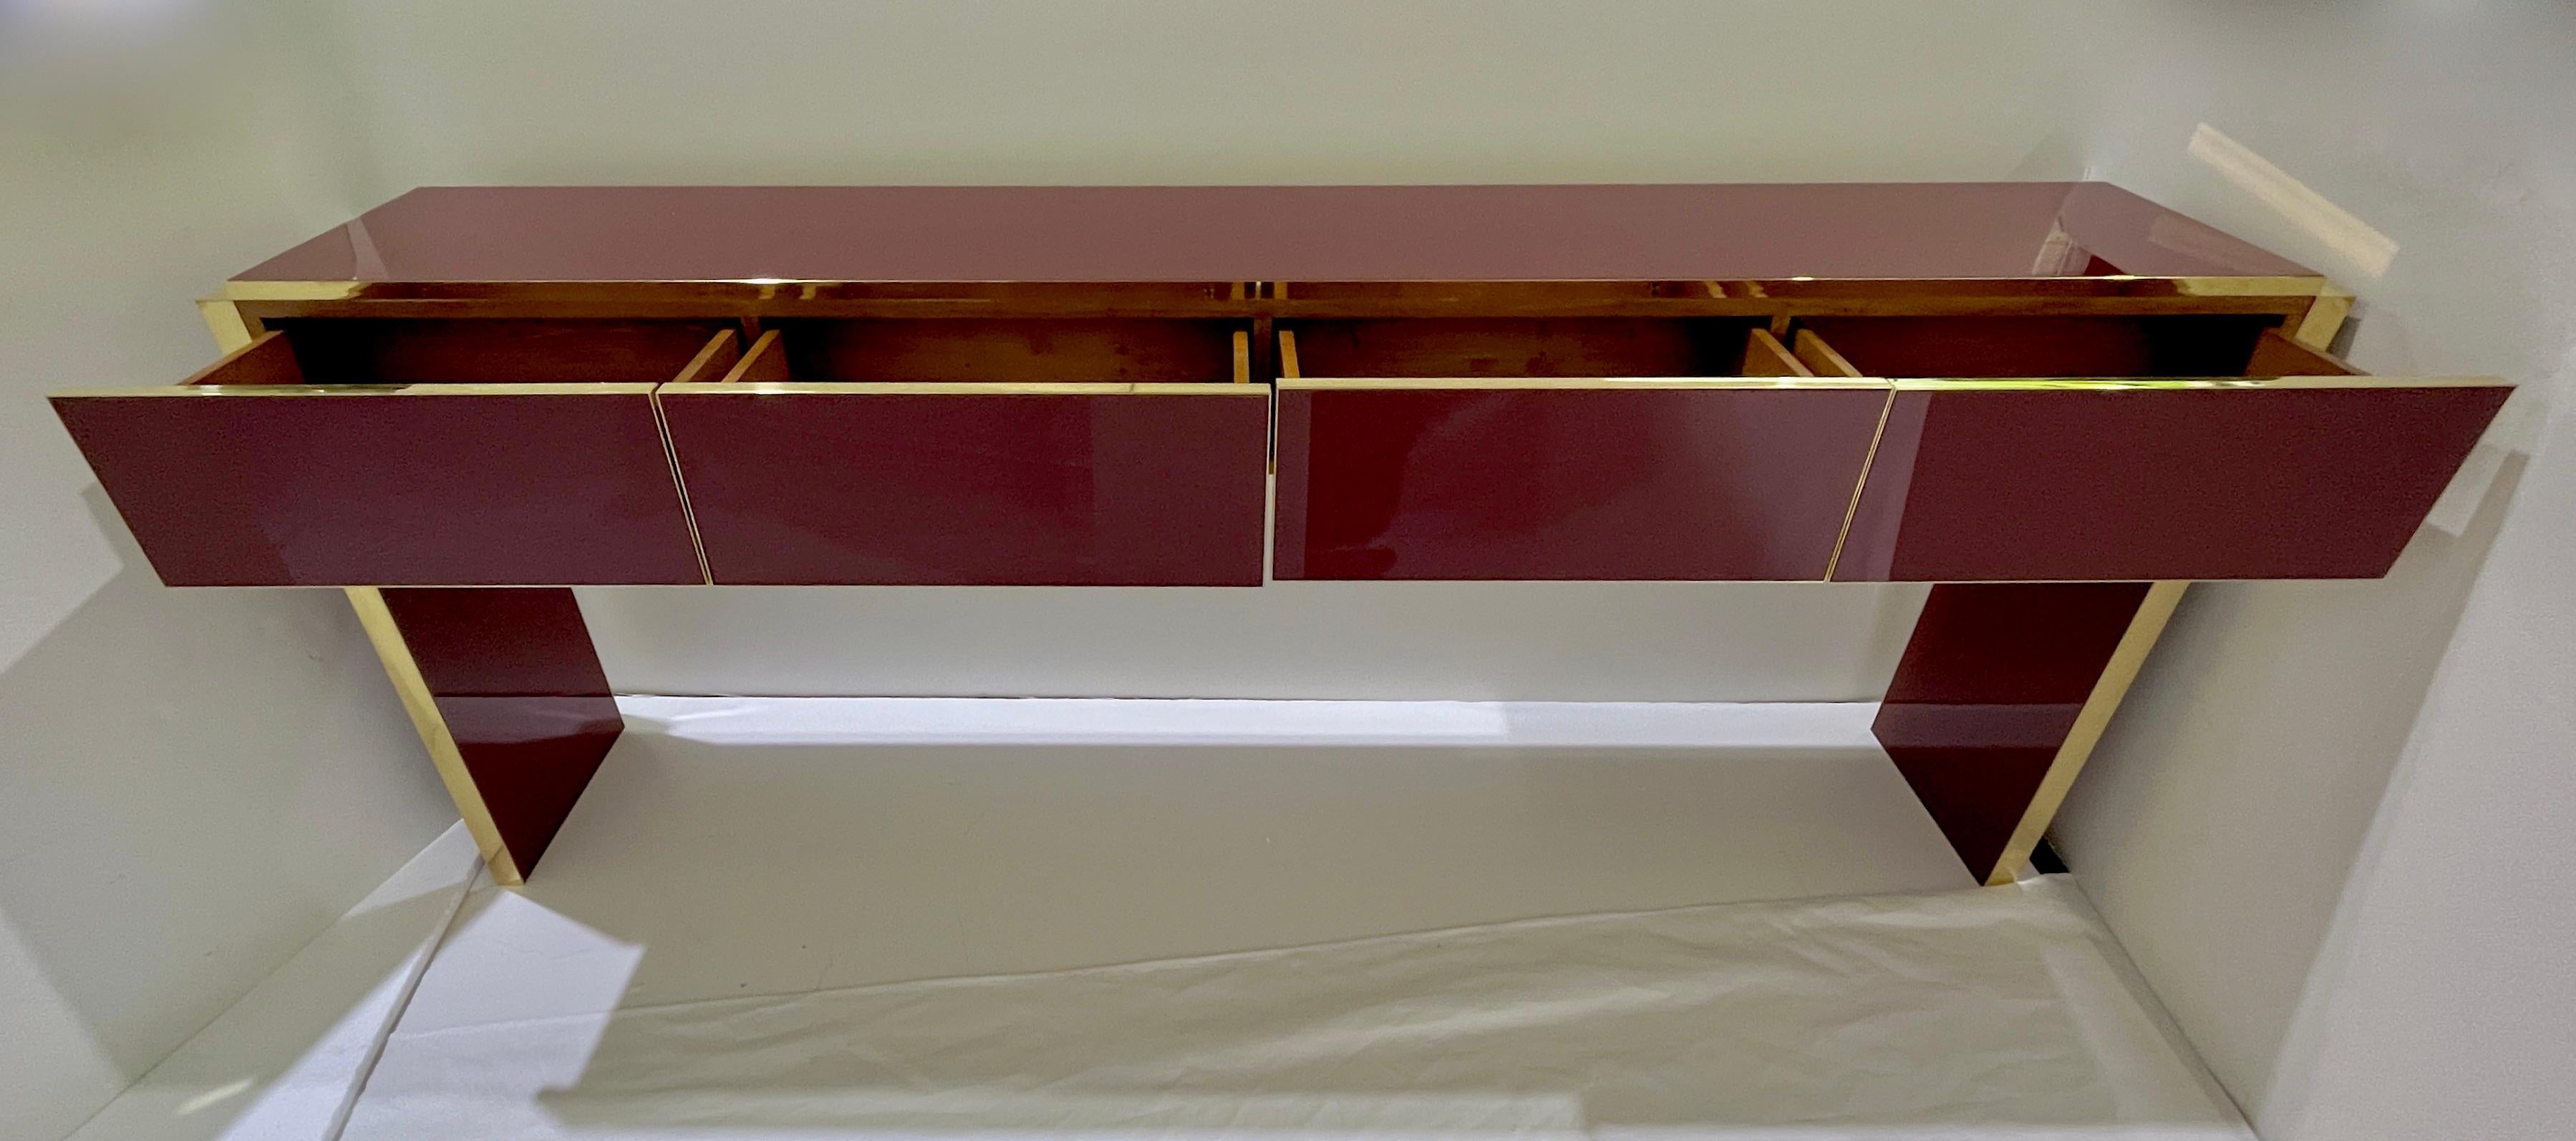 Hand-Crafted Bespoke Italian Long 4 Drawers Burgundy Wine & Brass Console Table/Sideboard For Sale